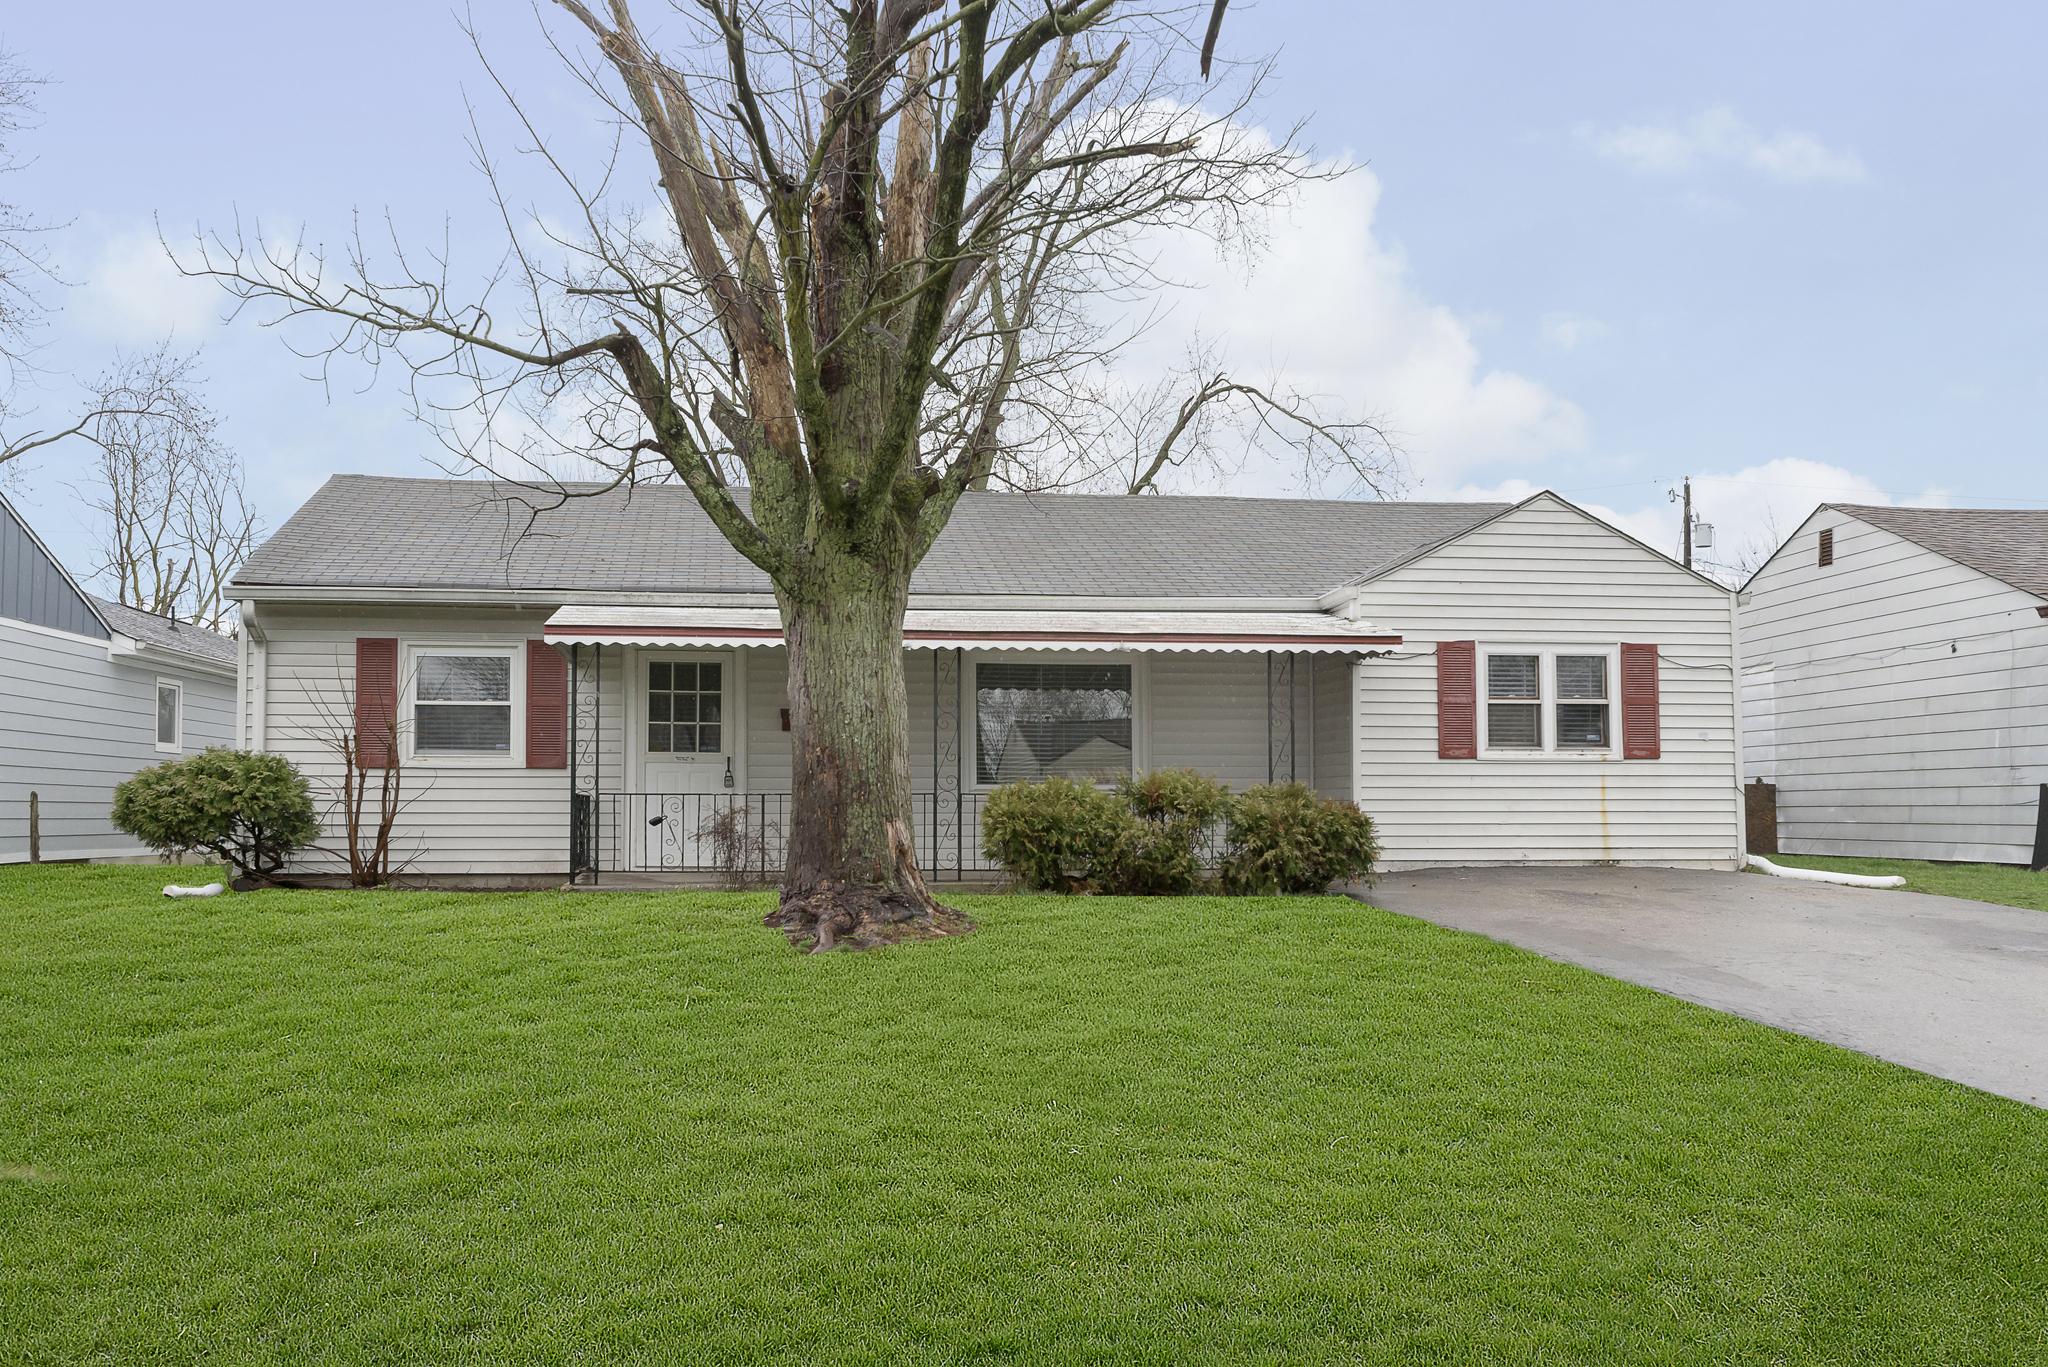 Photo one of 2220 N Catherwood N Ave Indianapolis IN 46219 | MLS 21967632